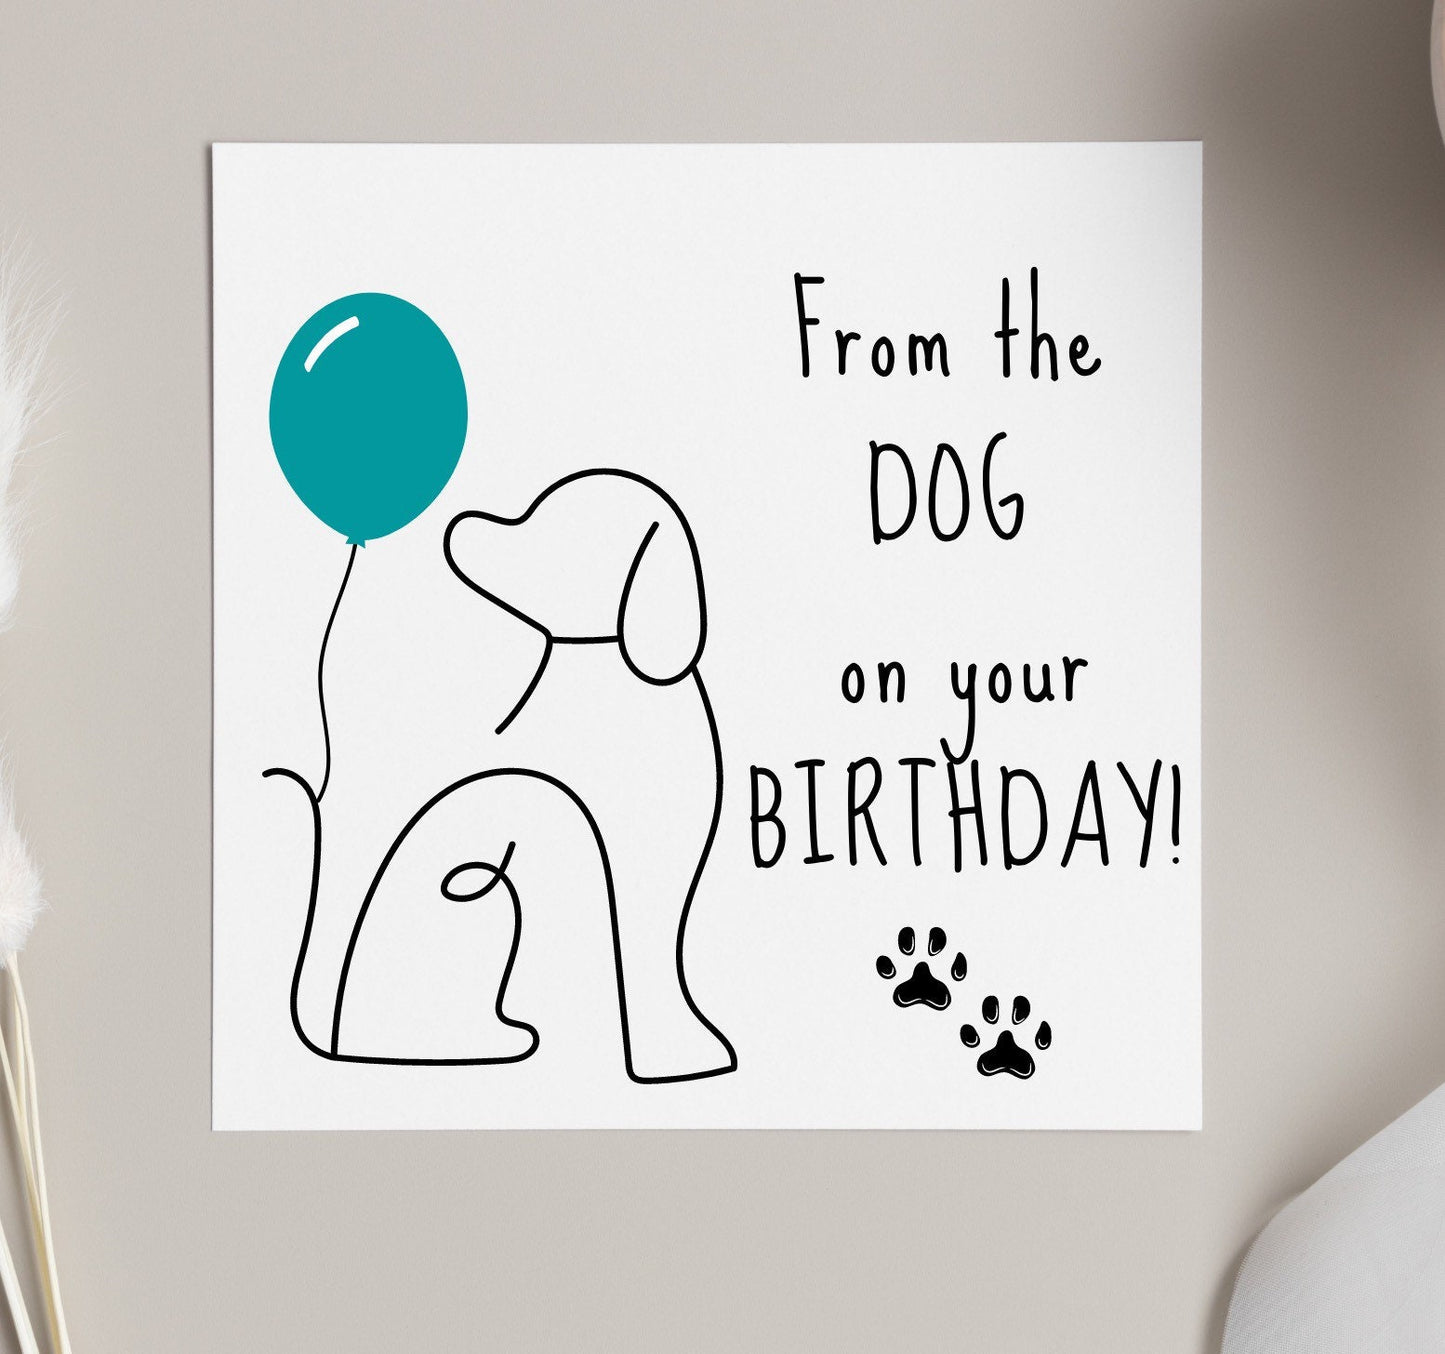 From the dog on your birthday, birthday card from pet dog, furry friends bday cards, dog mum dad cards for bday